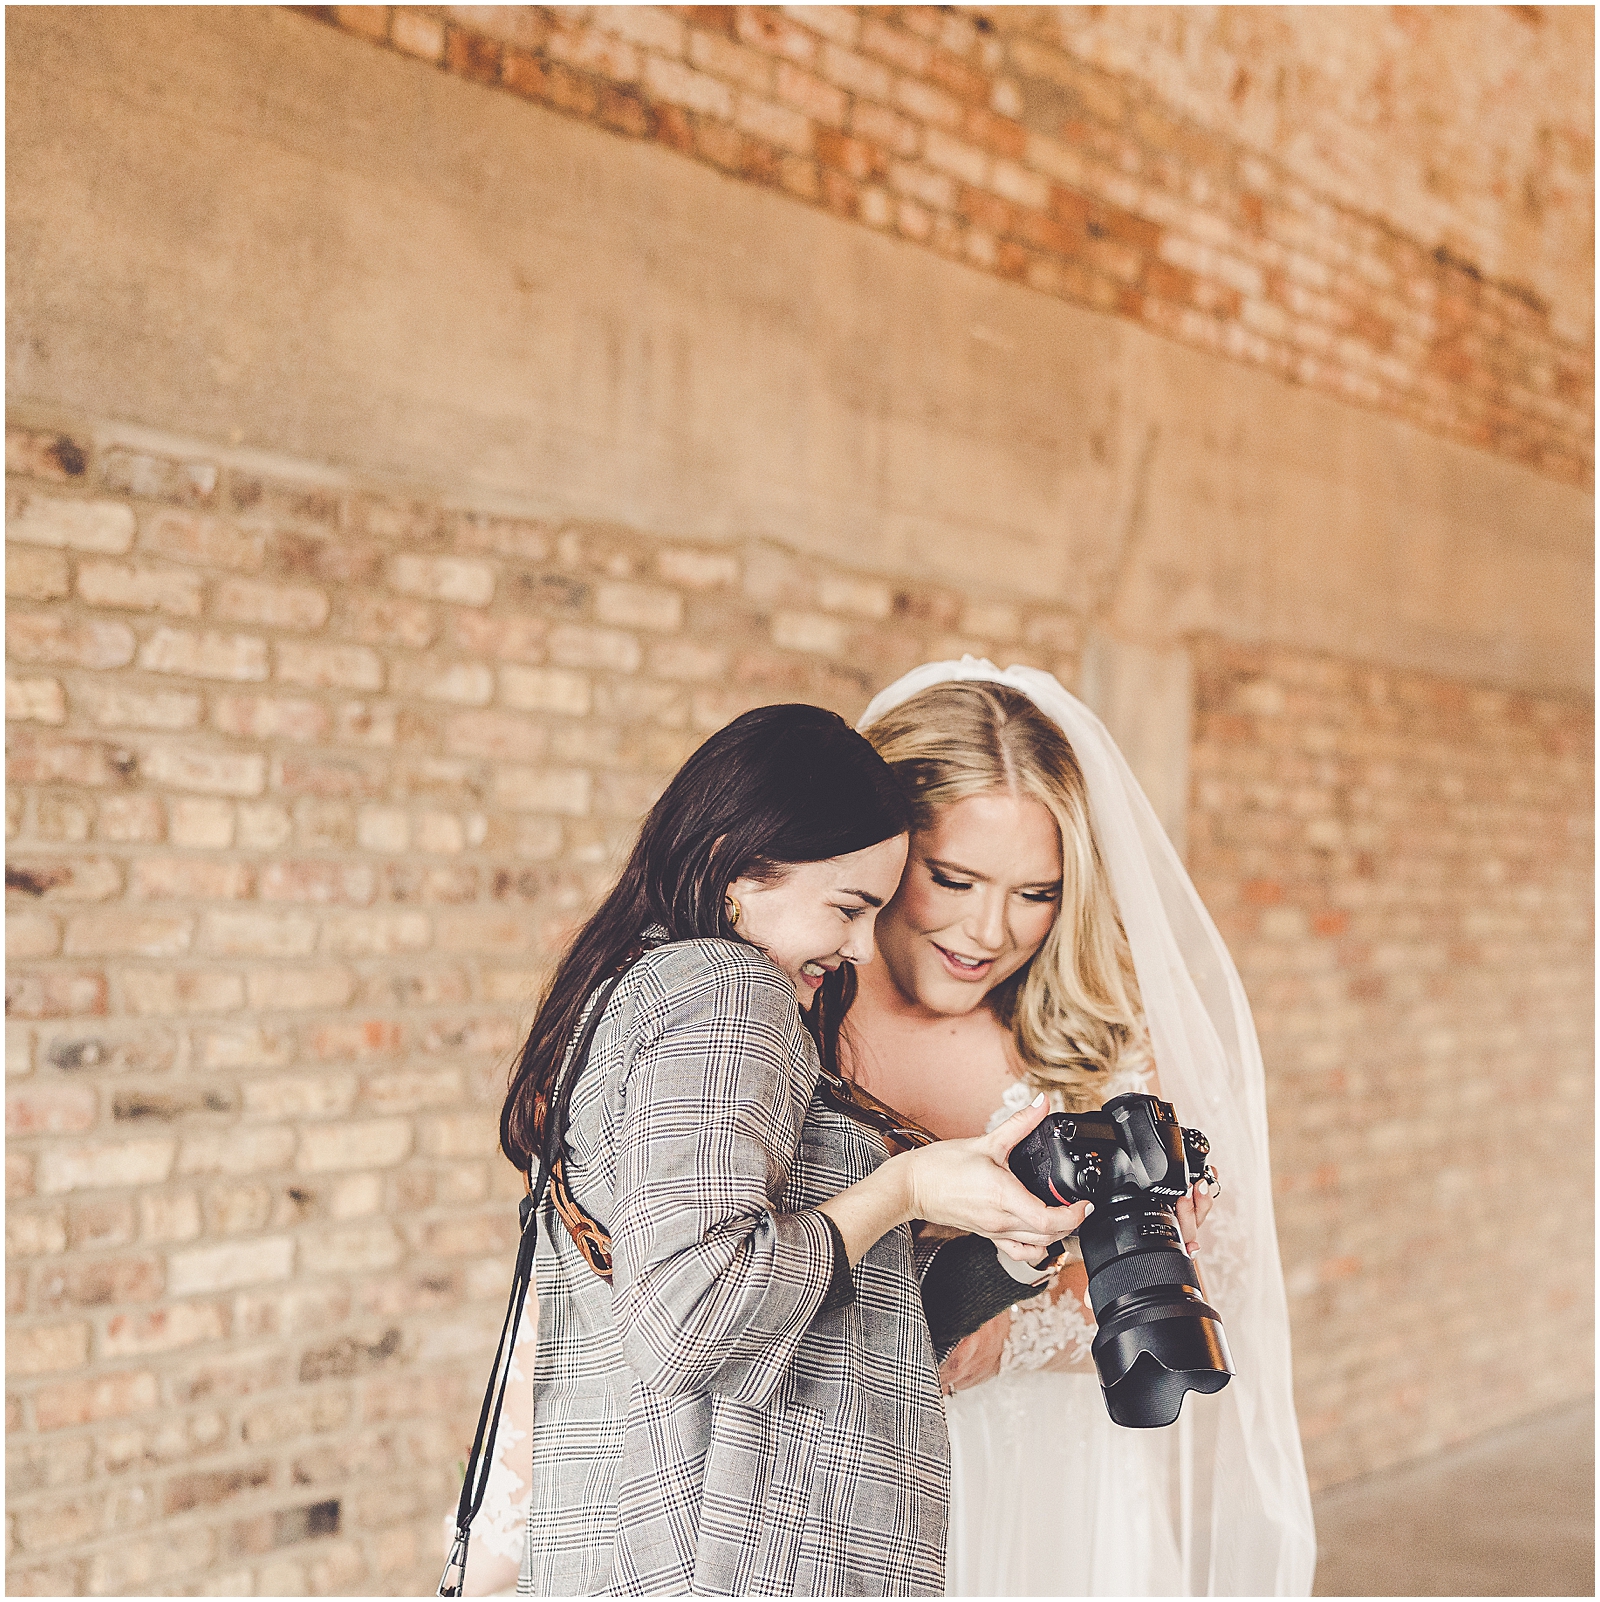 Finding Your Photography Niche with Kara Evans – a wedding & family photographer, VA for photographers, and mentor based in Chicagoland.